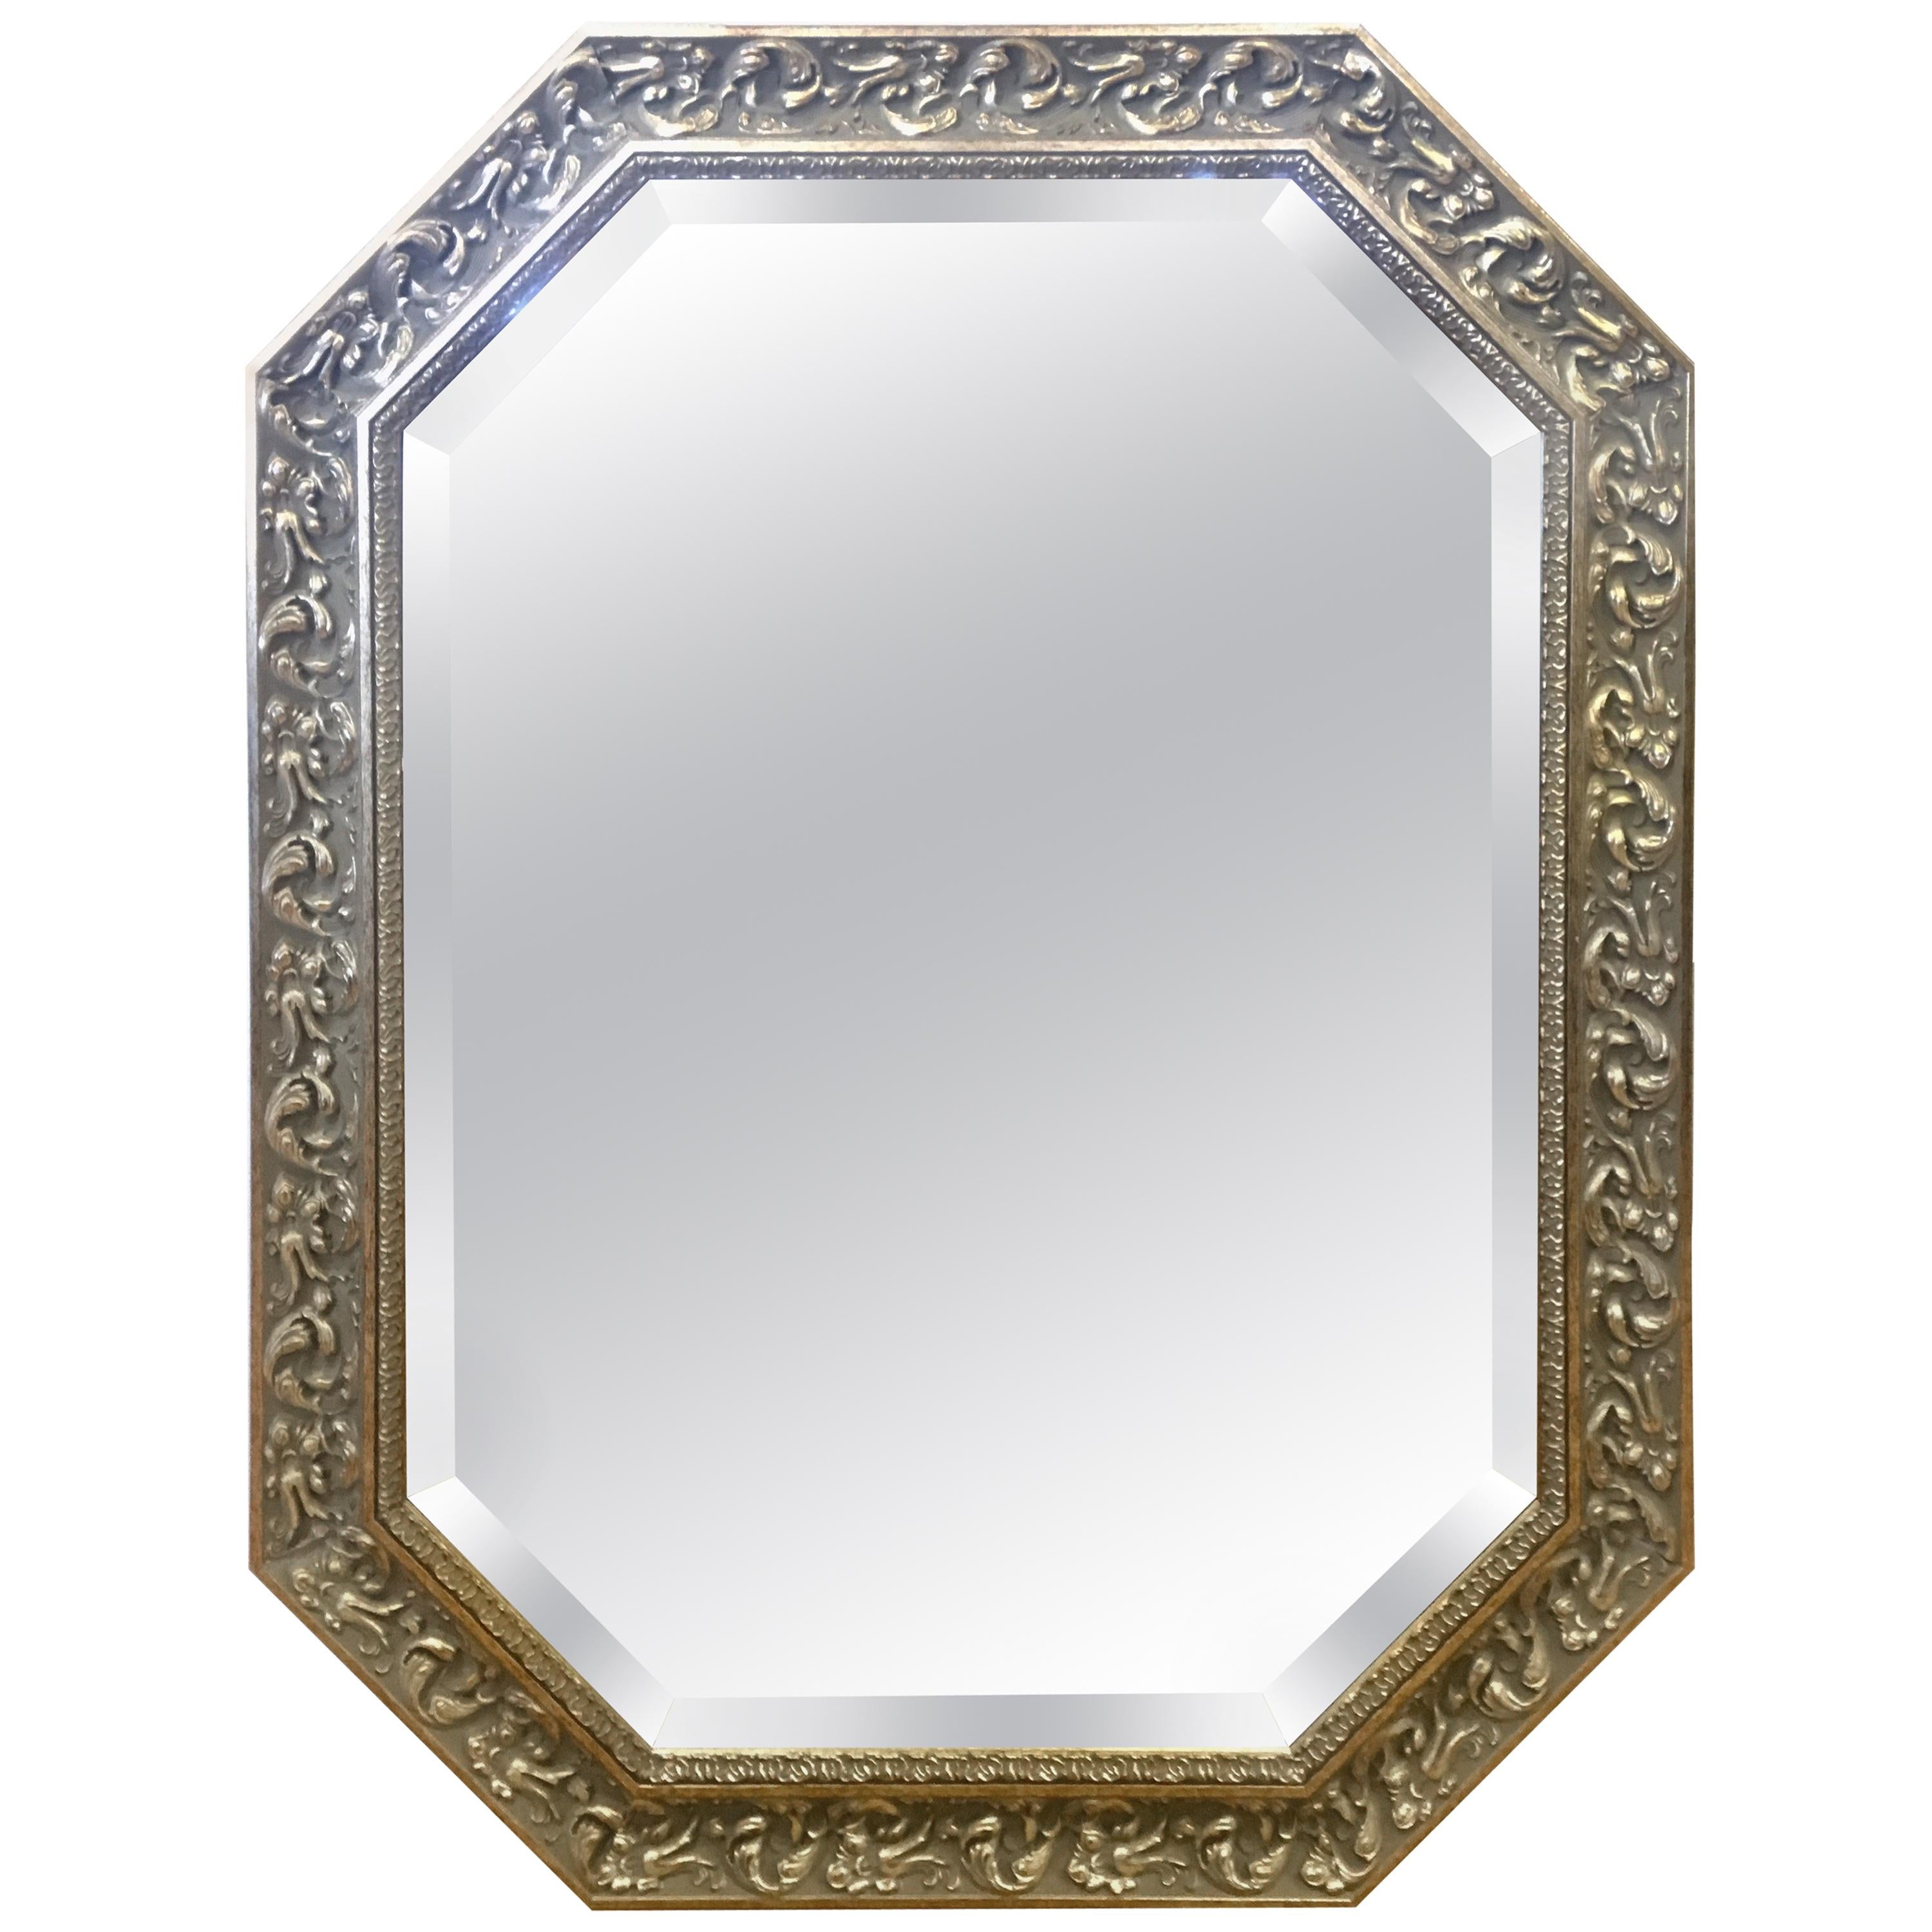 Octagonal Carved Beveled Hanging Wall Mirror Done in Gilt and Silver Color